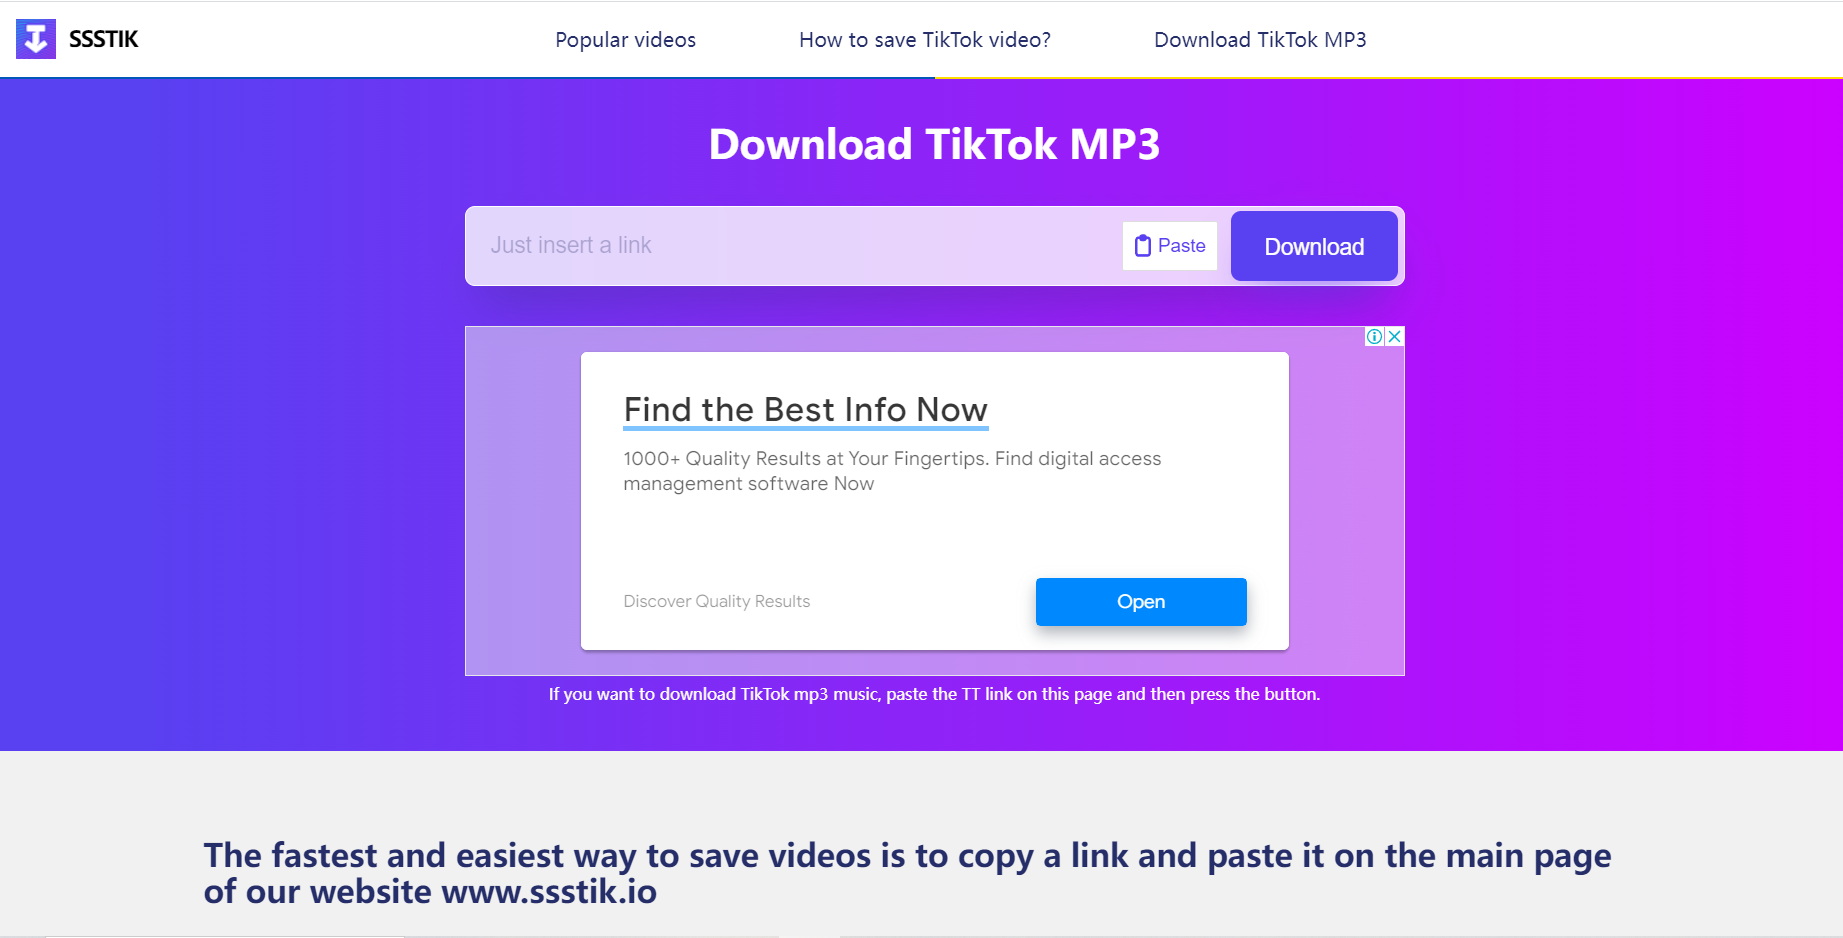 How to Download and Convert a TikTok to MP3 